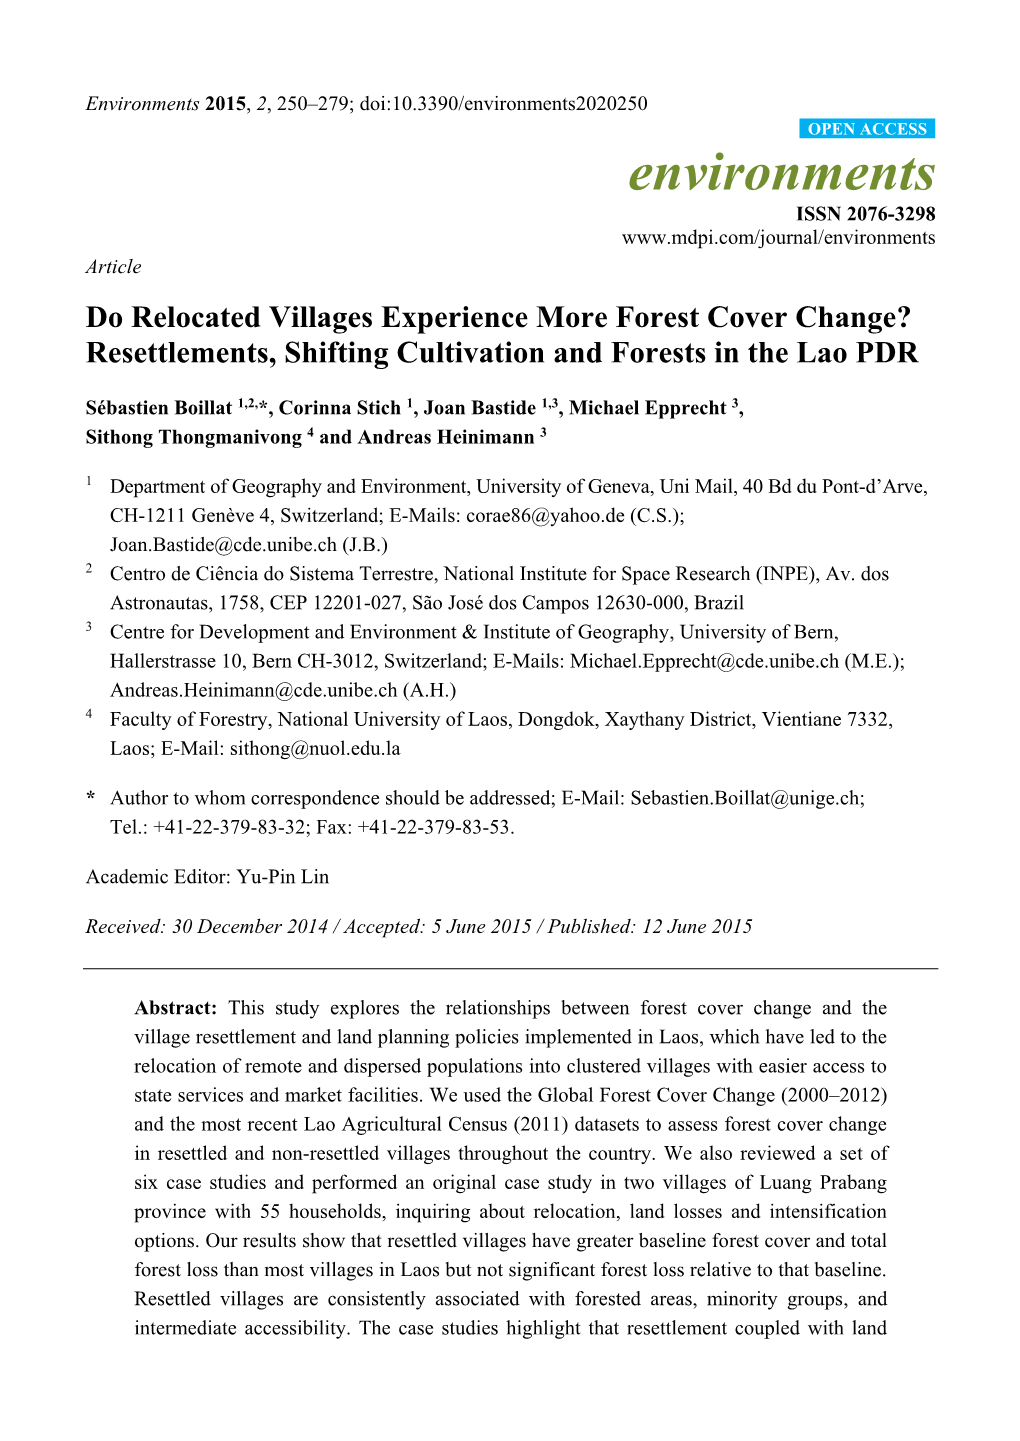 Do Relocated Villages Experience More Forest Cover Change? Resettlements, Shifting Cultivation and Forests in the Lao PDR